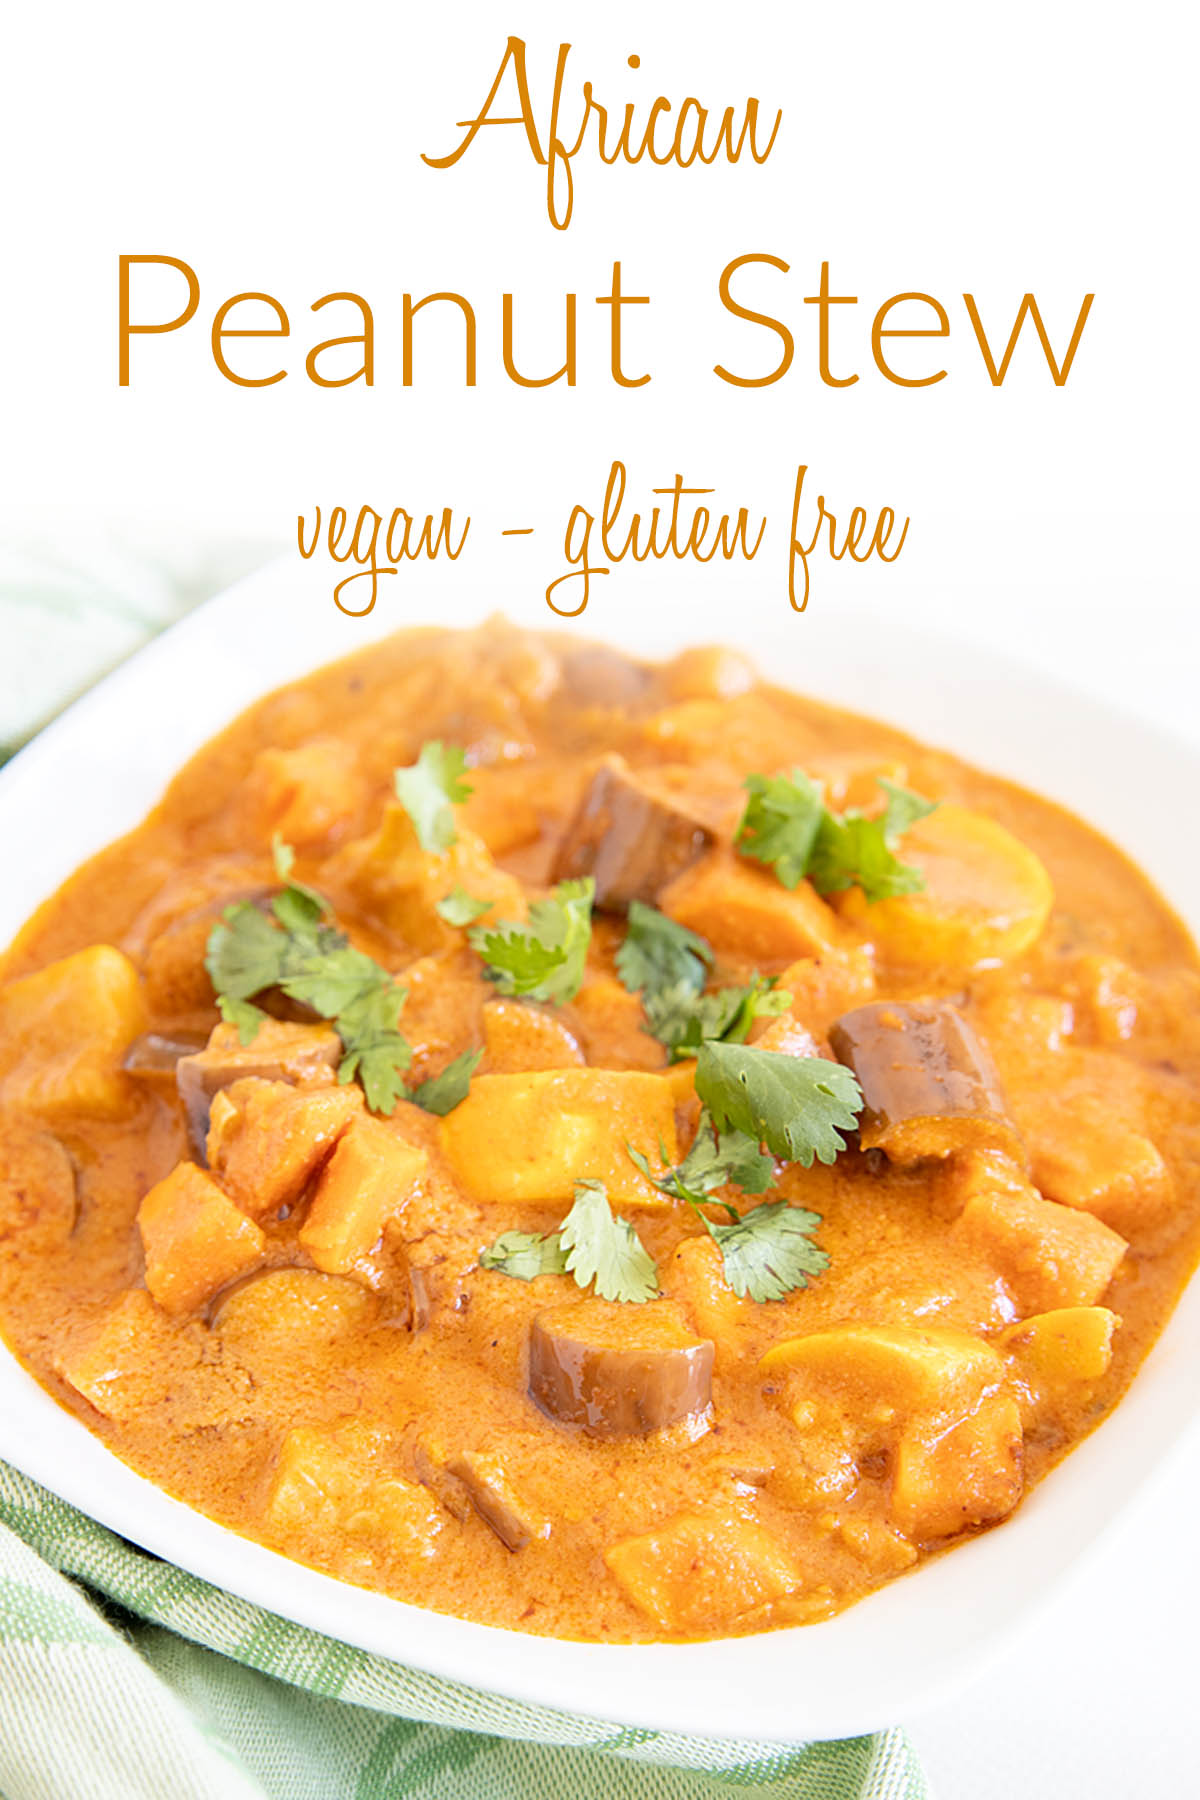 African Peanut Stew photo with text.